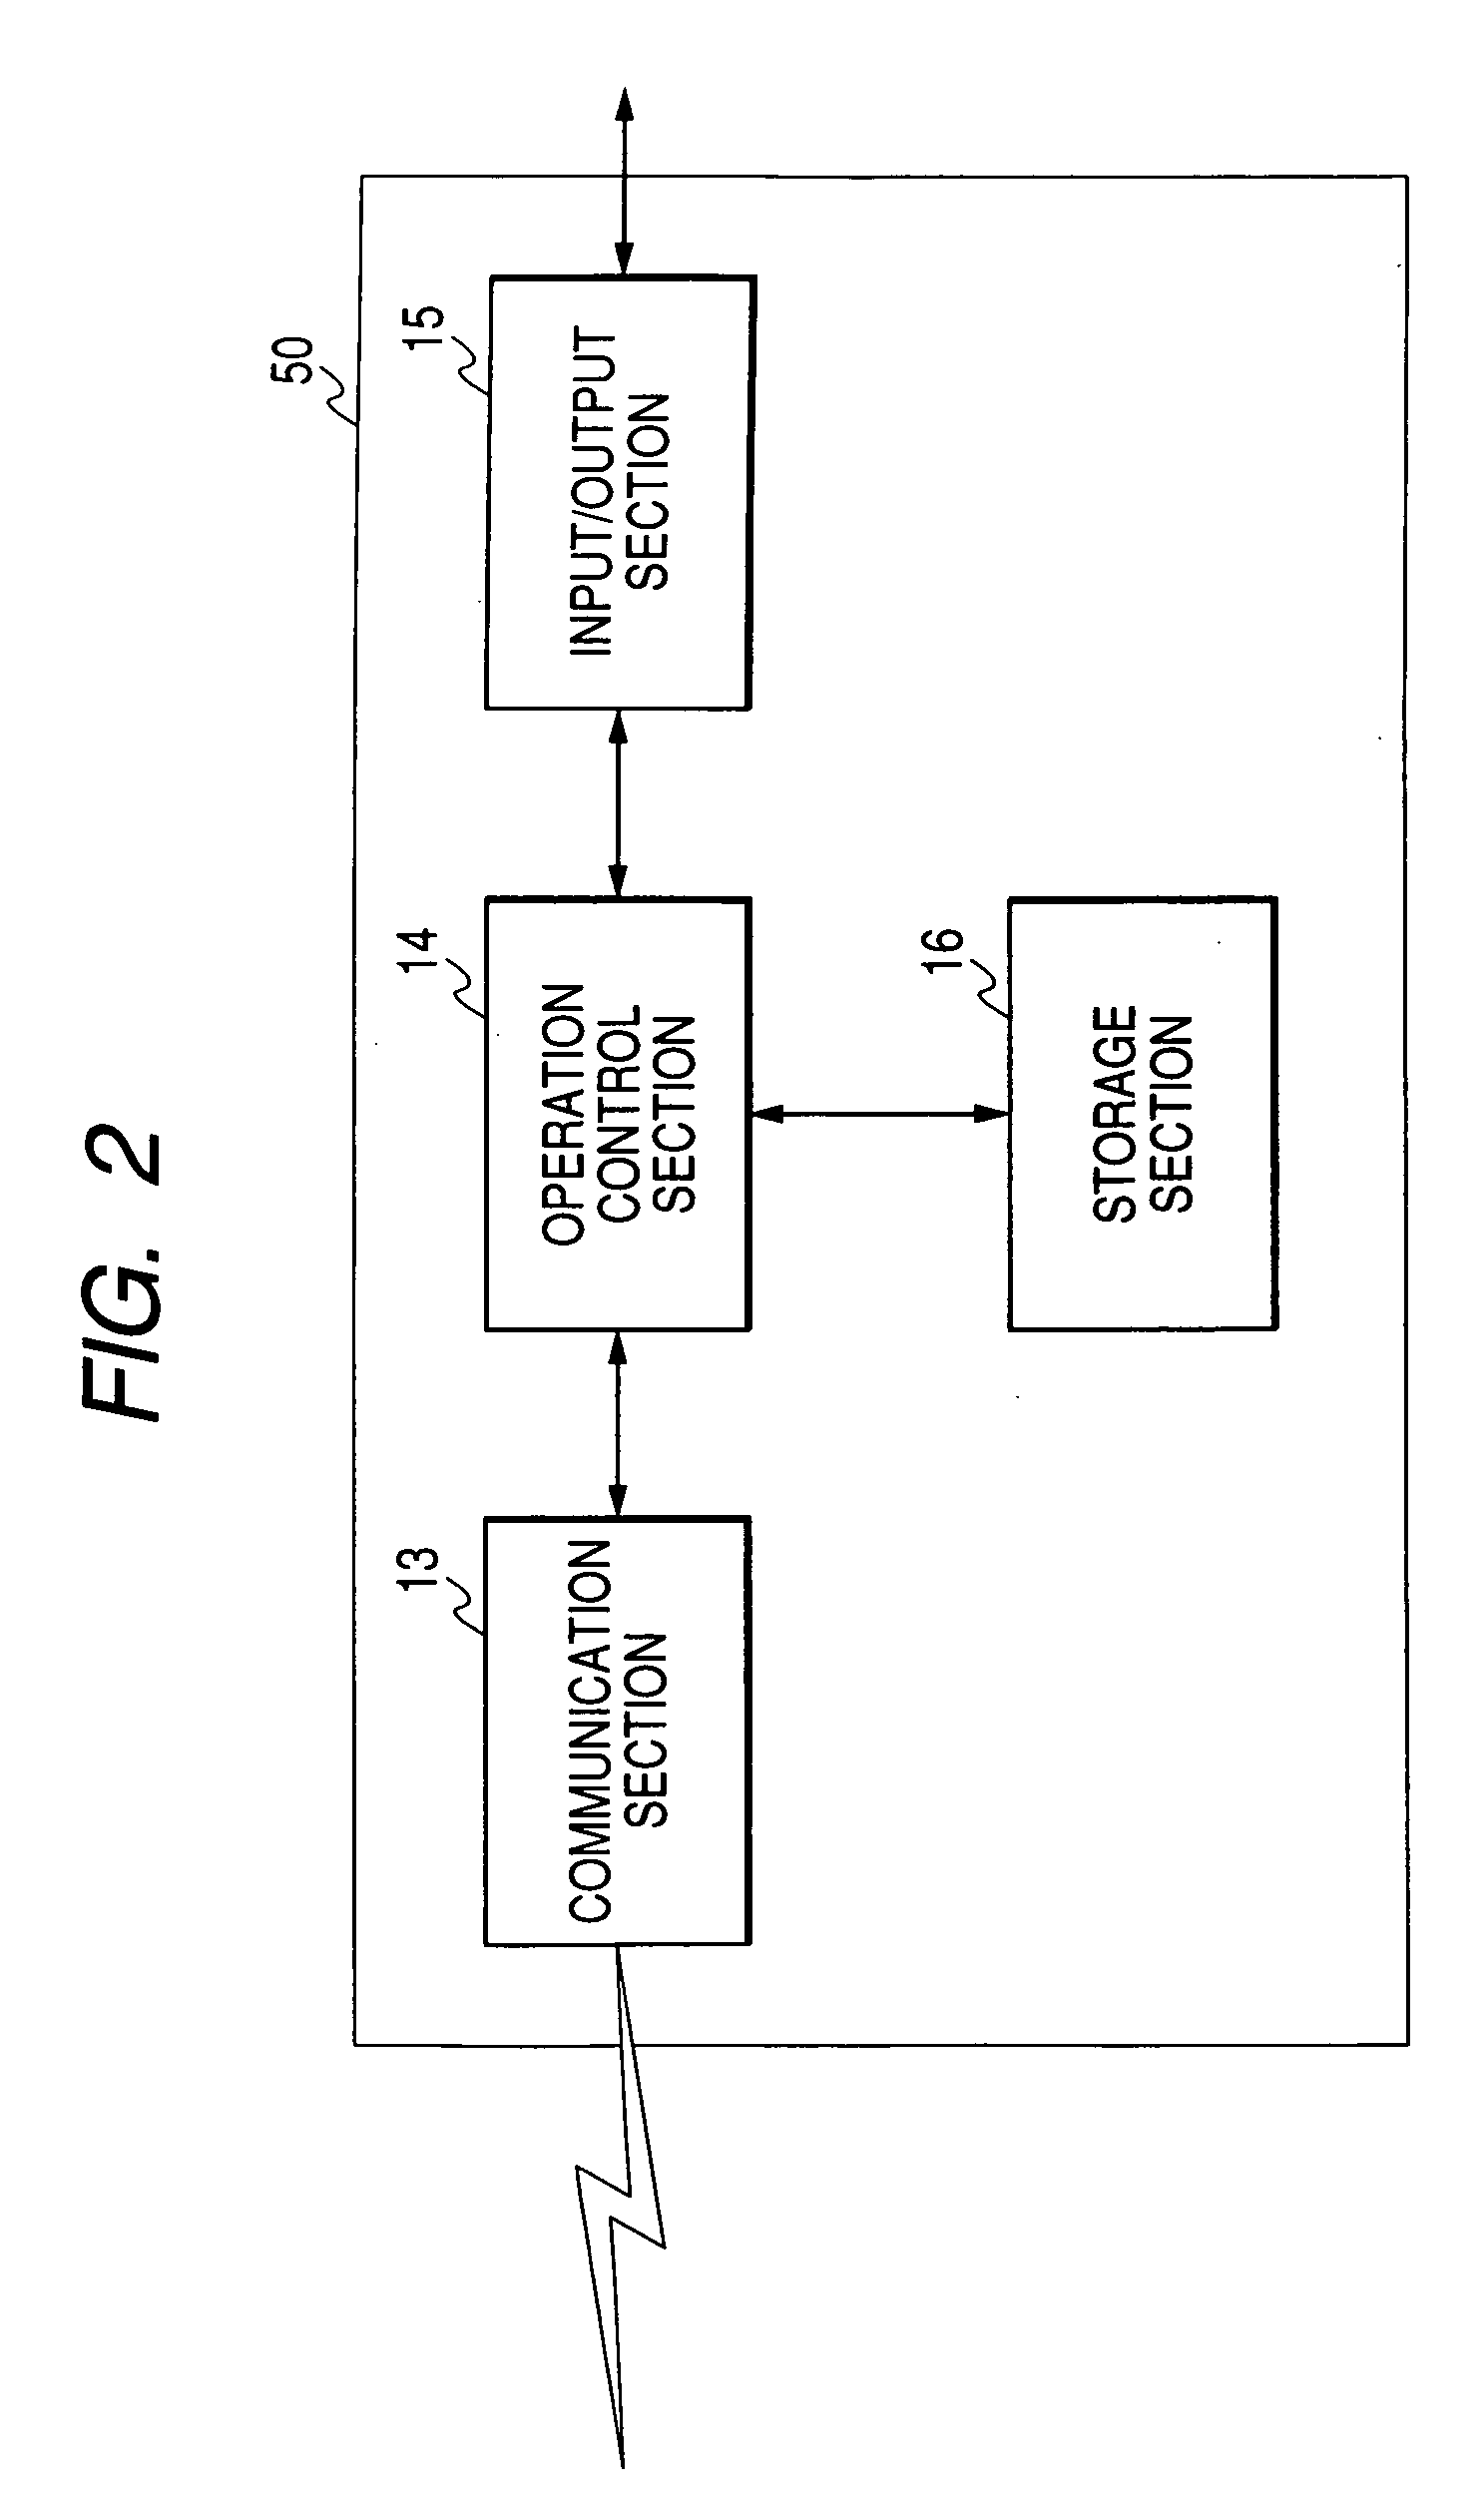 Packet analysis system